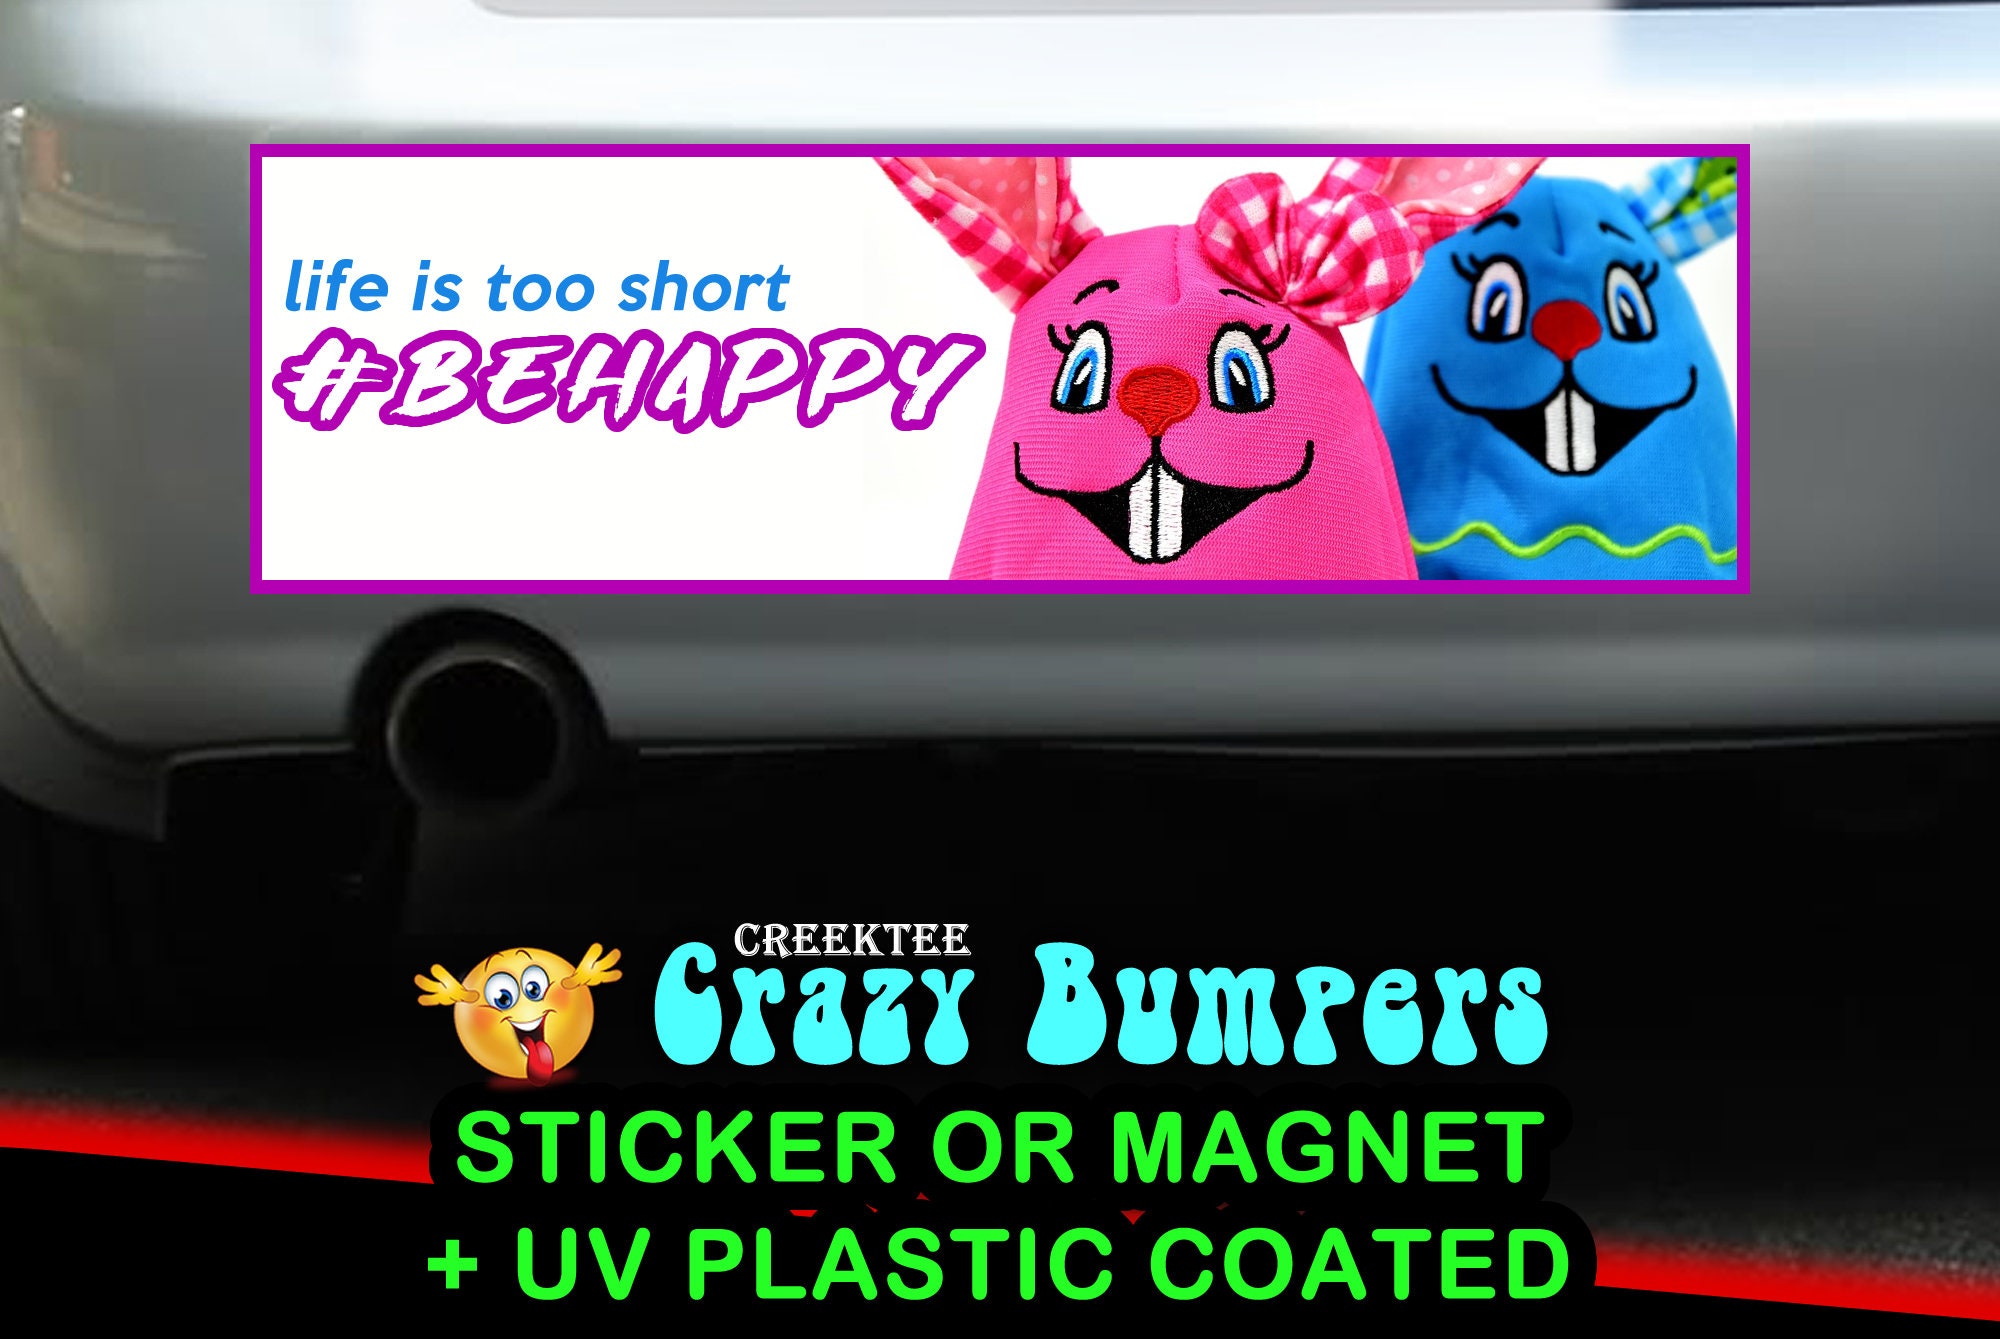 Lifes too short be happy 10 x 3 Bumper Sticker or Magnetic Bumper Sticker Available